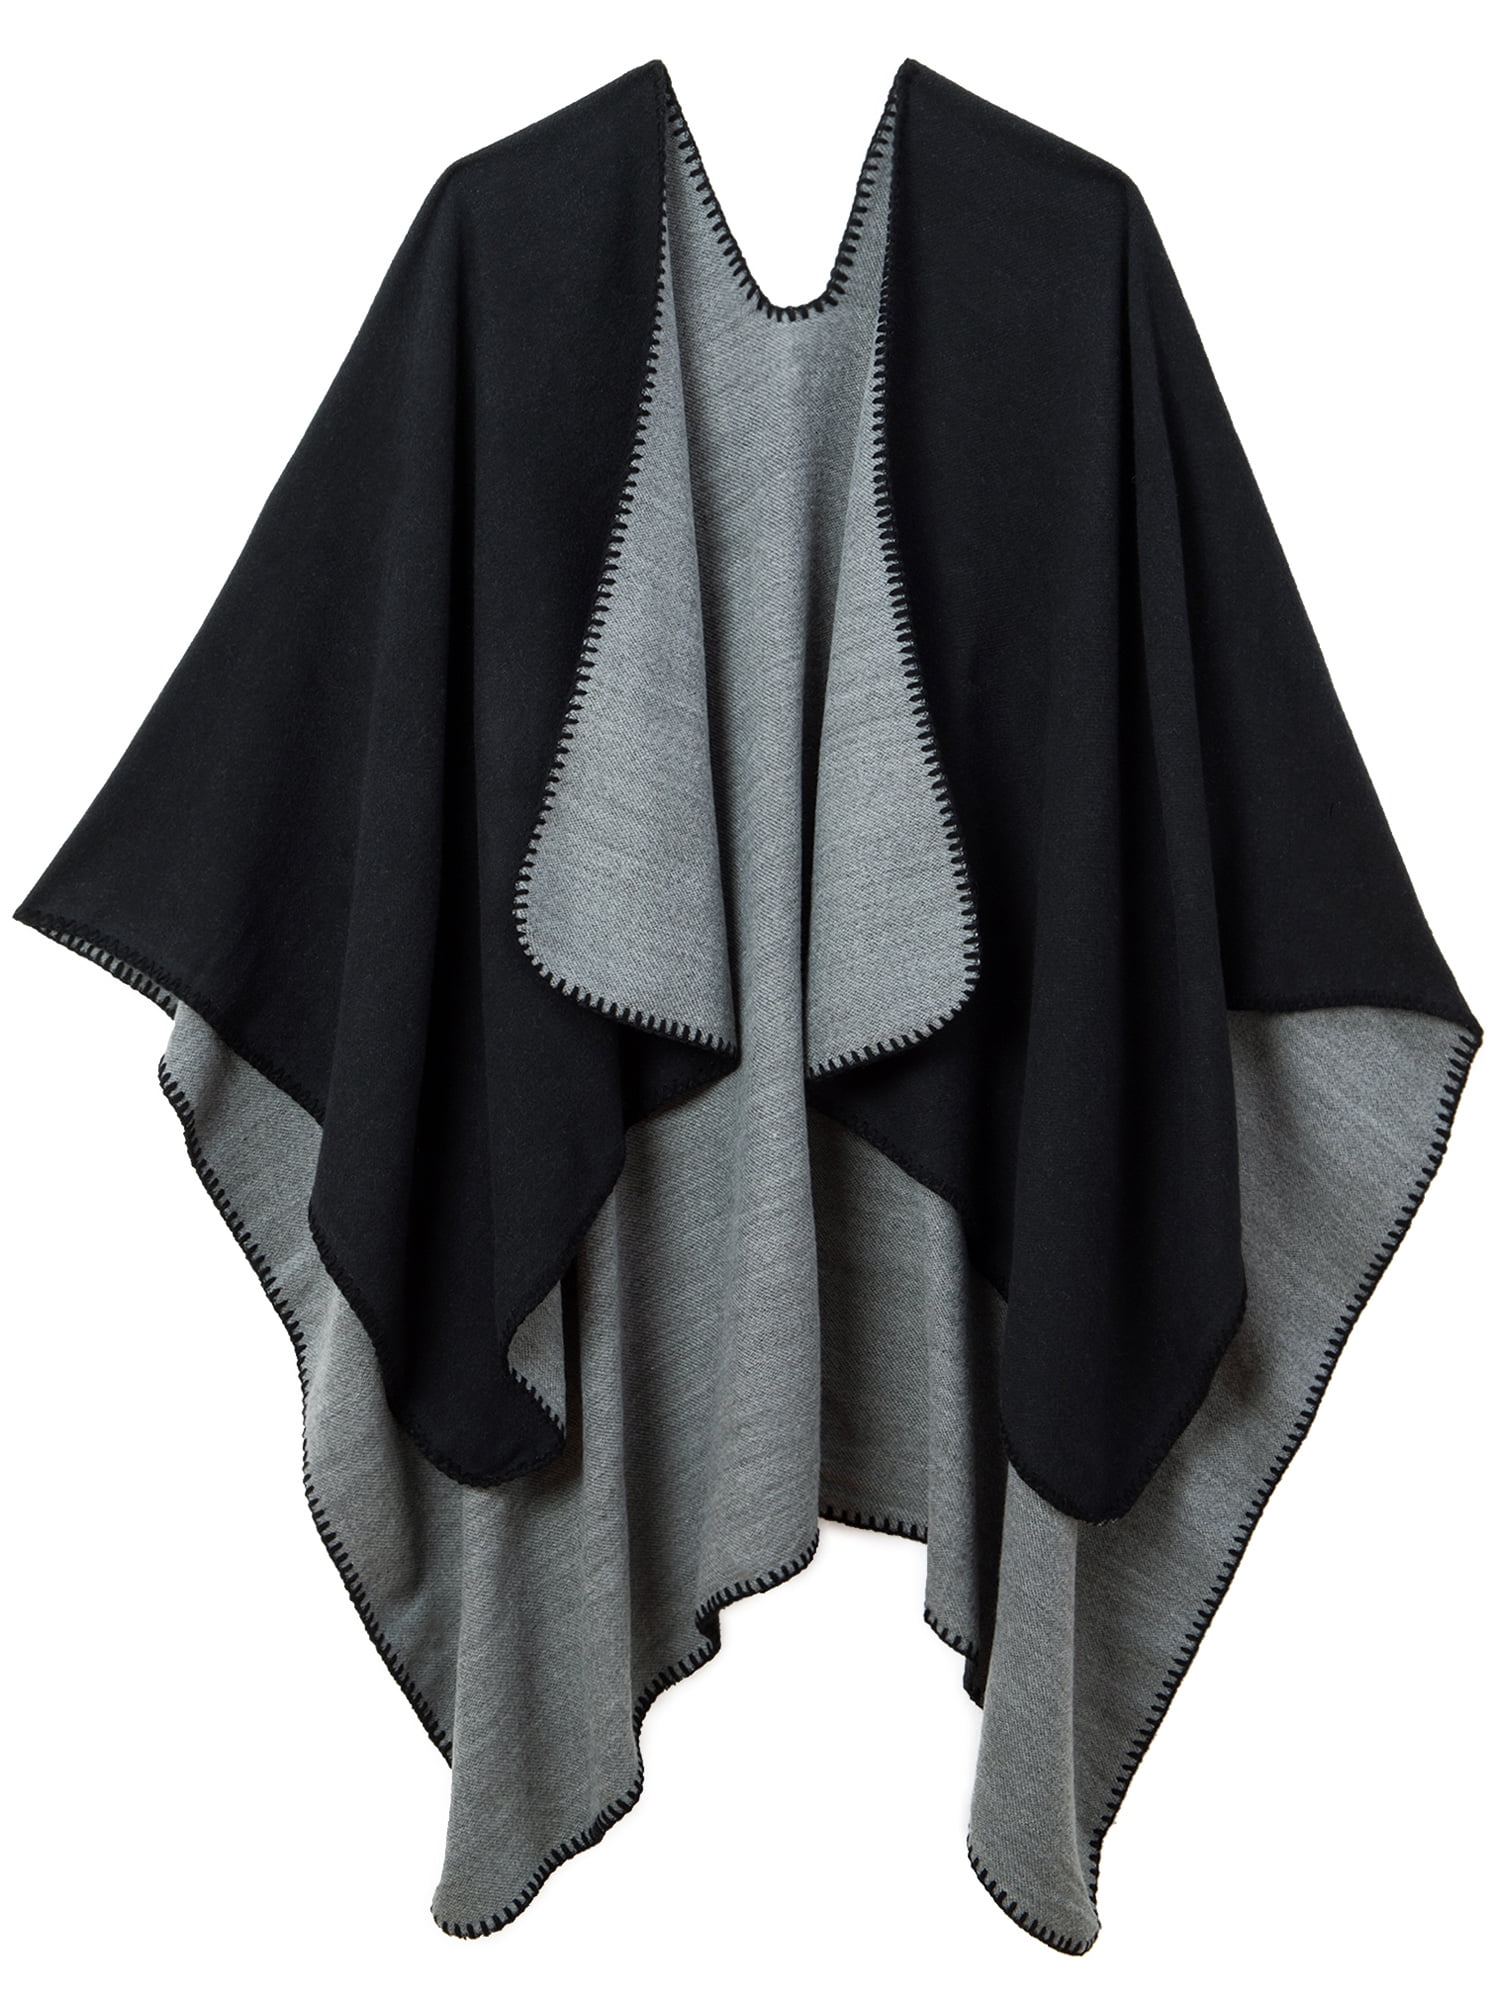 Wrap Black Anti Pill Polyester Fleece Ruana Shawl Wearable Blanket or Poncho-Lightweight Warmth-Handmade-One Size Fits Many Cape